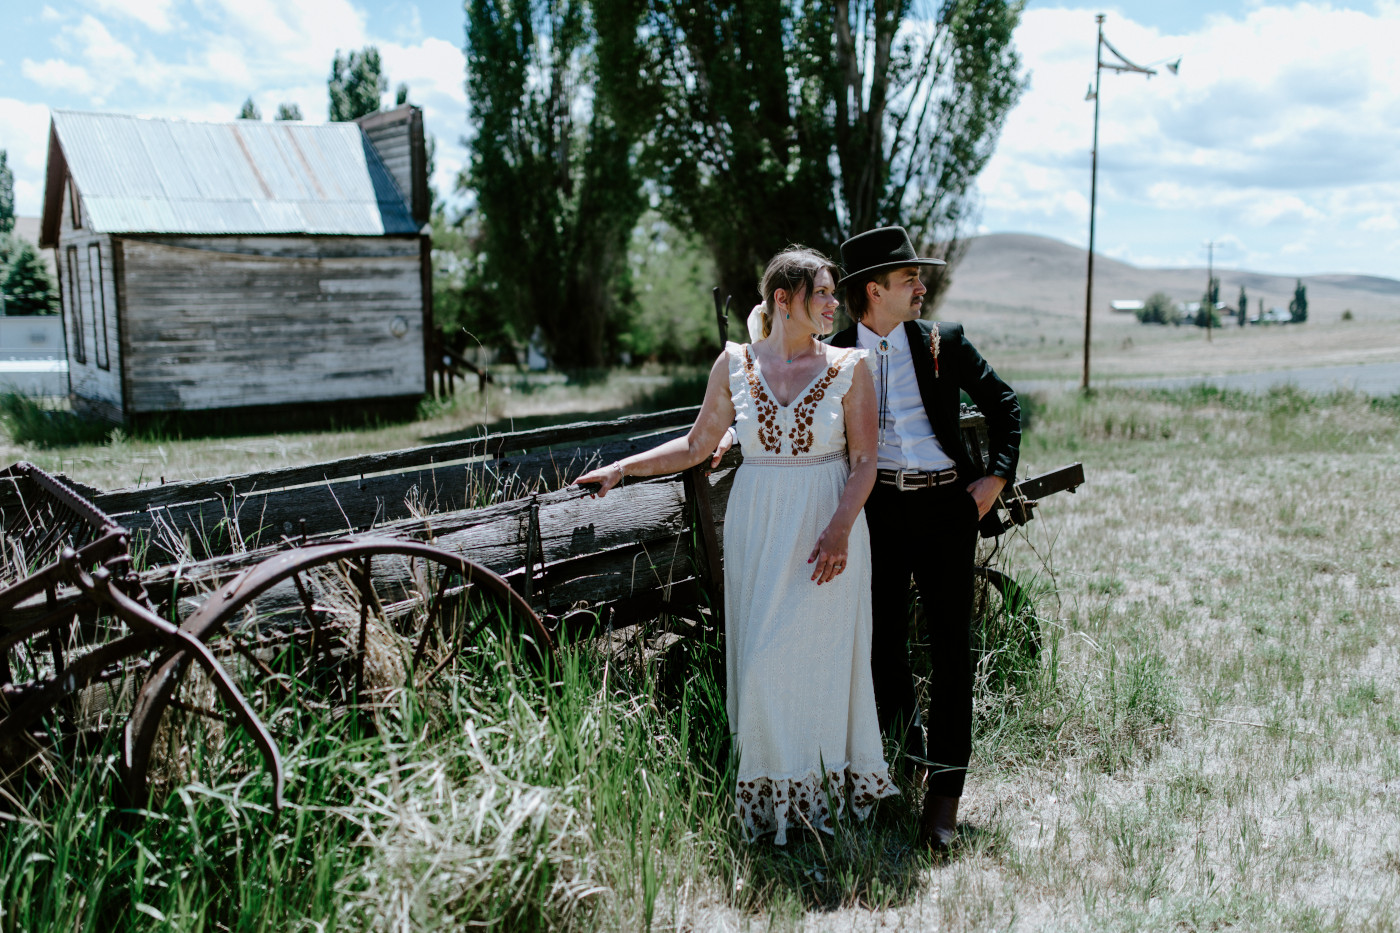 Greyson and Emily stand together in a field. Elopement photography in the Central Oregon desert by Sienna Plus Josh.